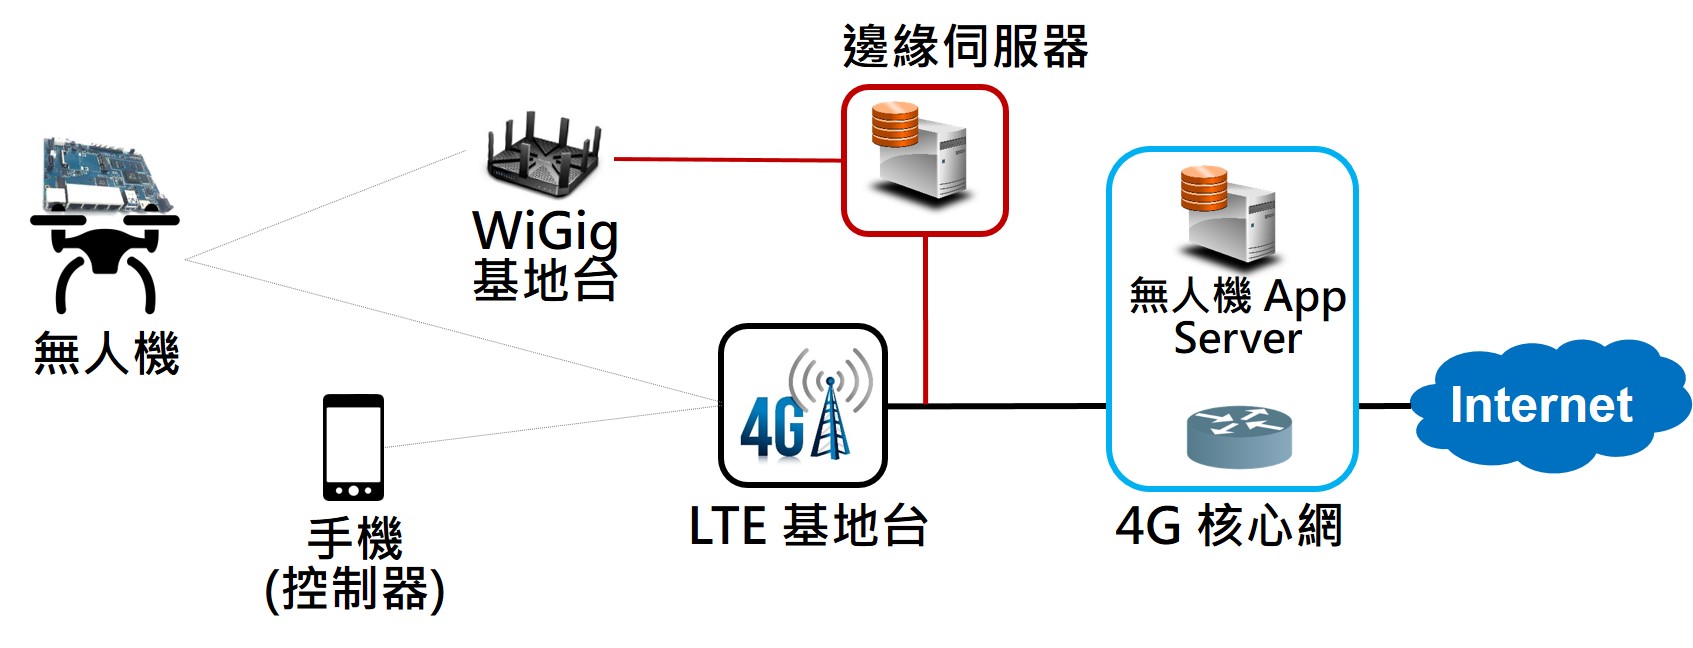 Network-intensive UAV with long-range control over LTE networksultrahigh-speed WiGig communication